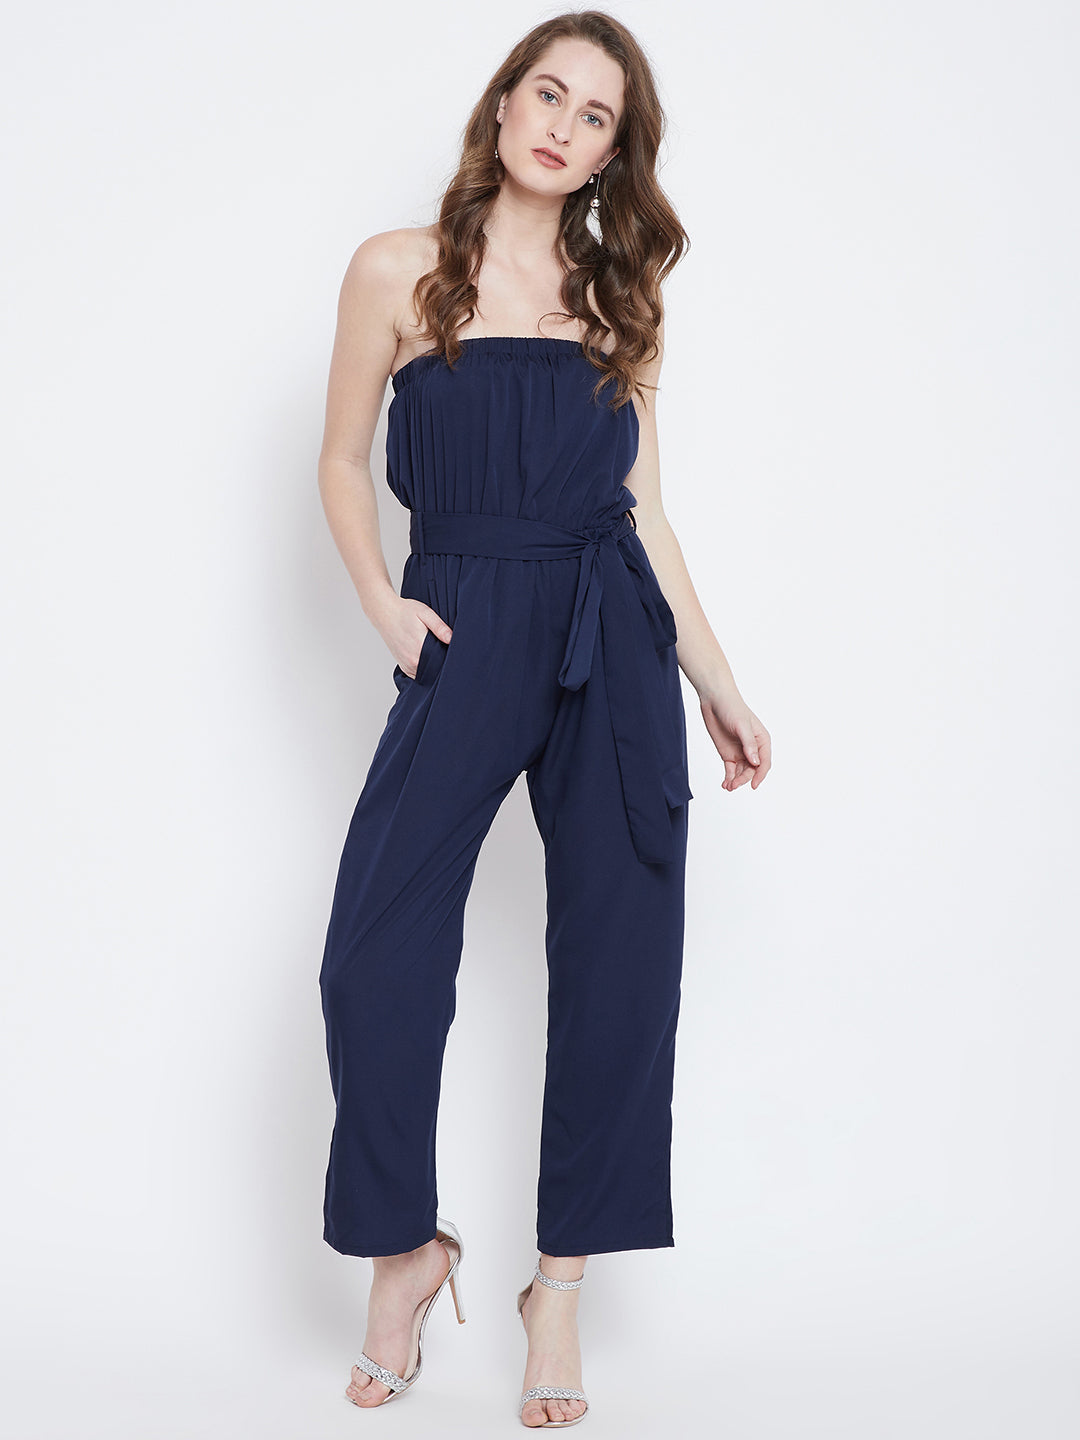 size medium Navy Tie-Waist Short-Sleeve Jumpsuit from Floral Blooming new |  eBay